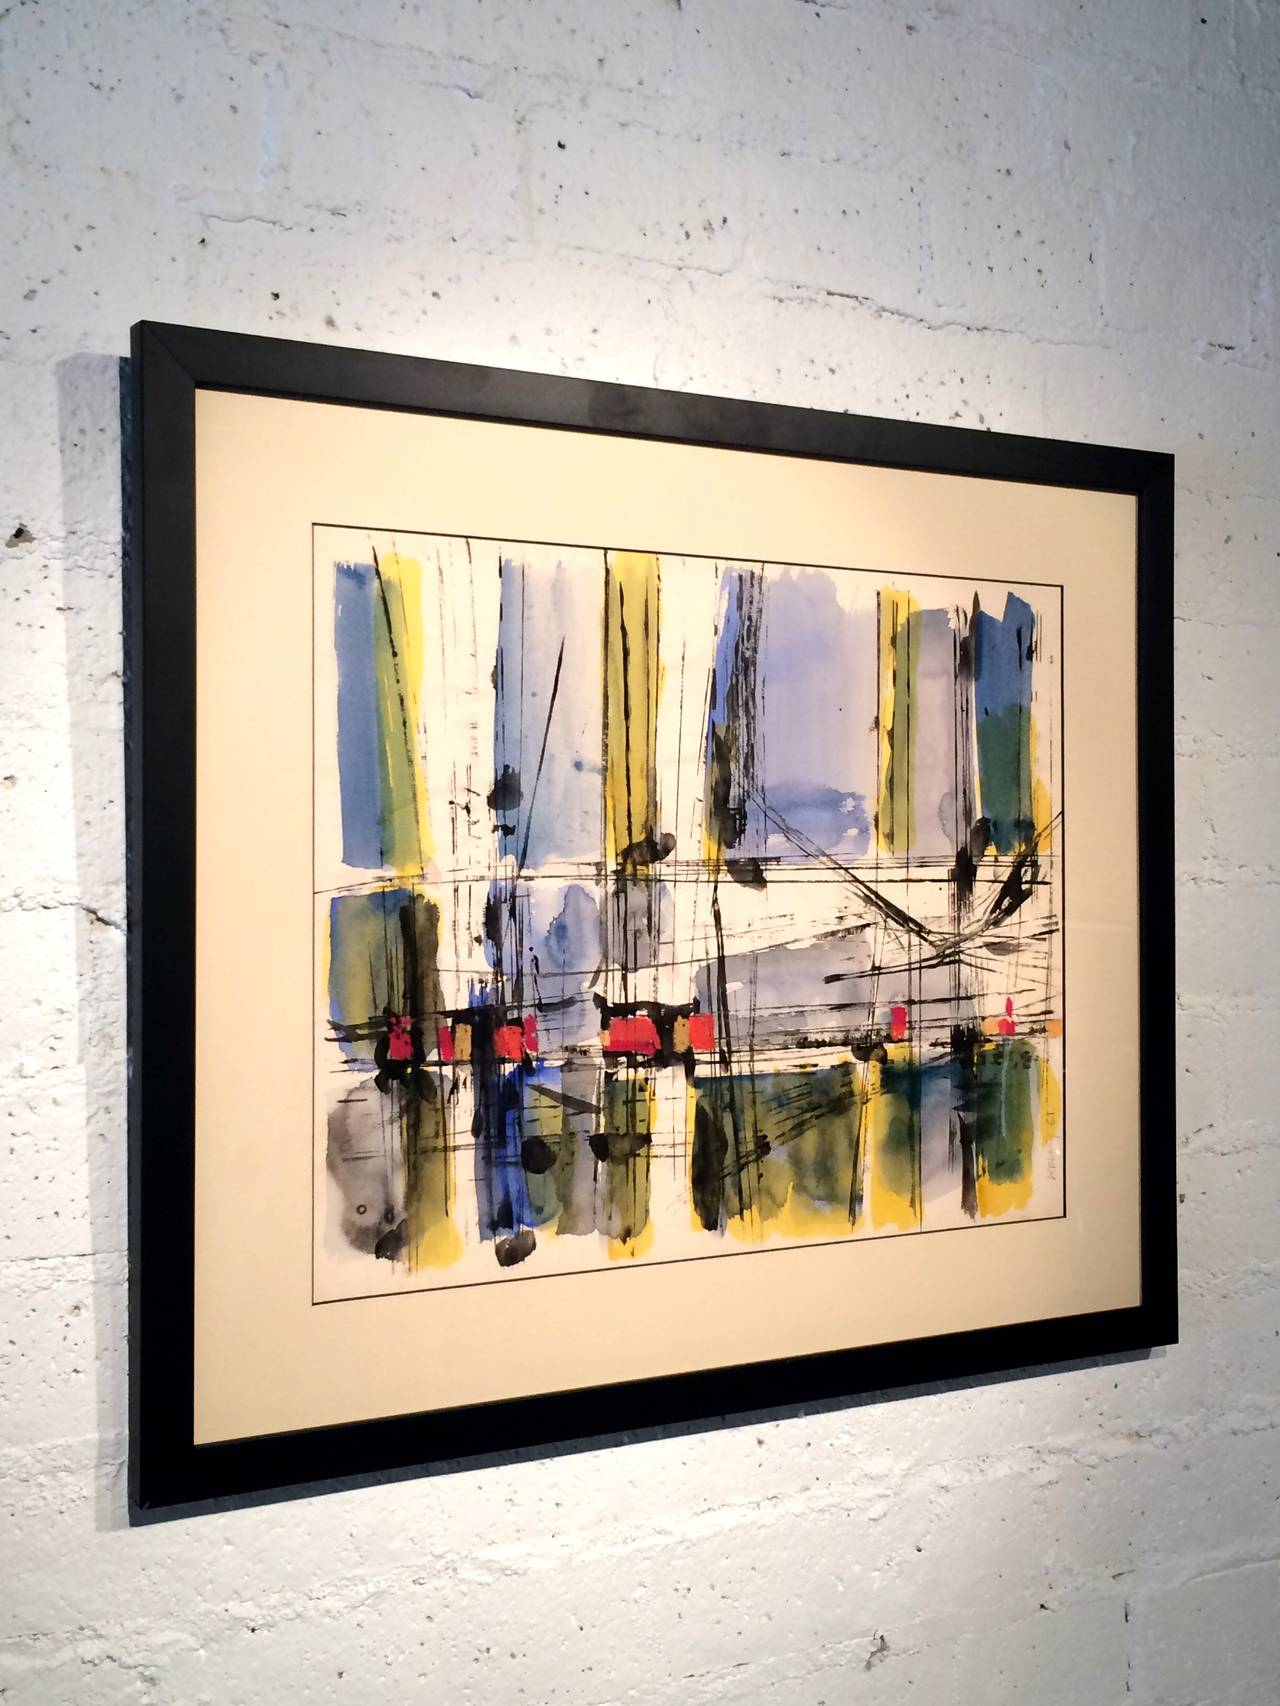 Original painting by listed artist Patrick William Kelly. 
This watercolor and ink abstract is titled 